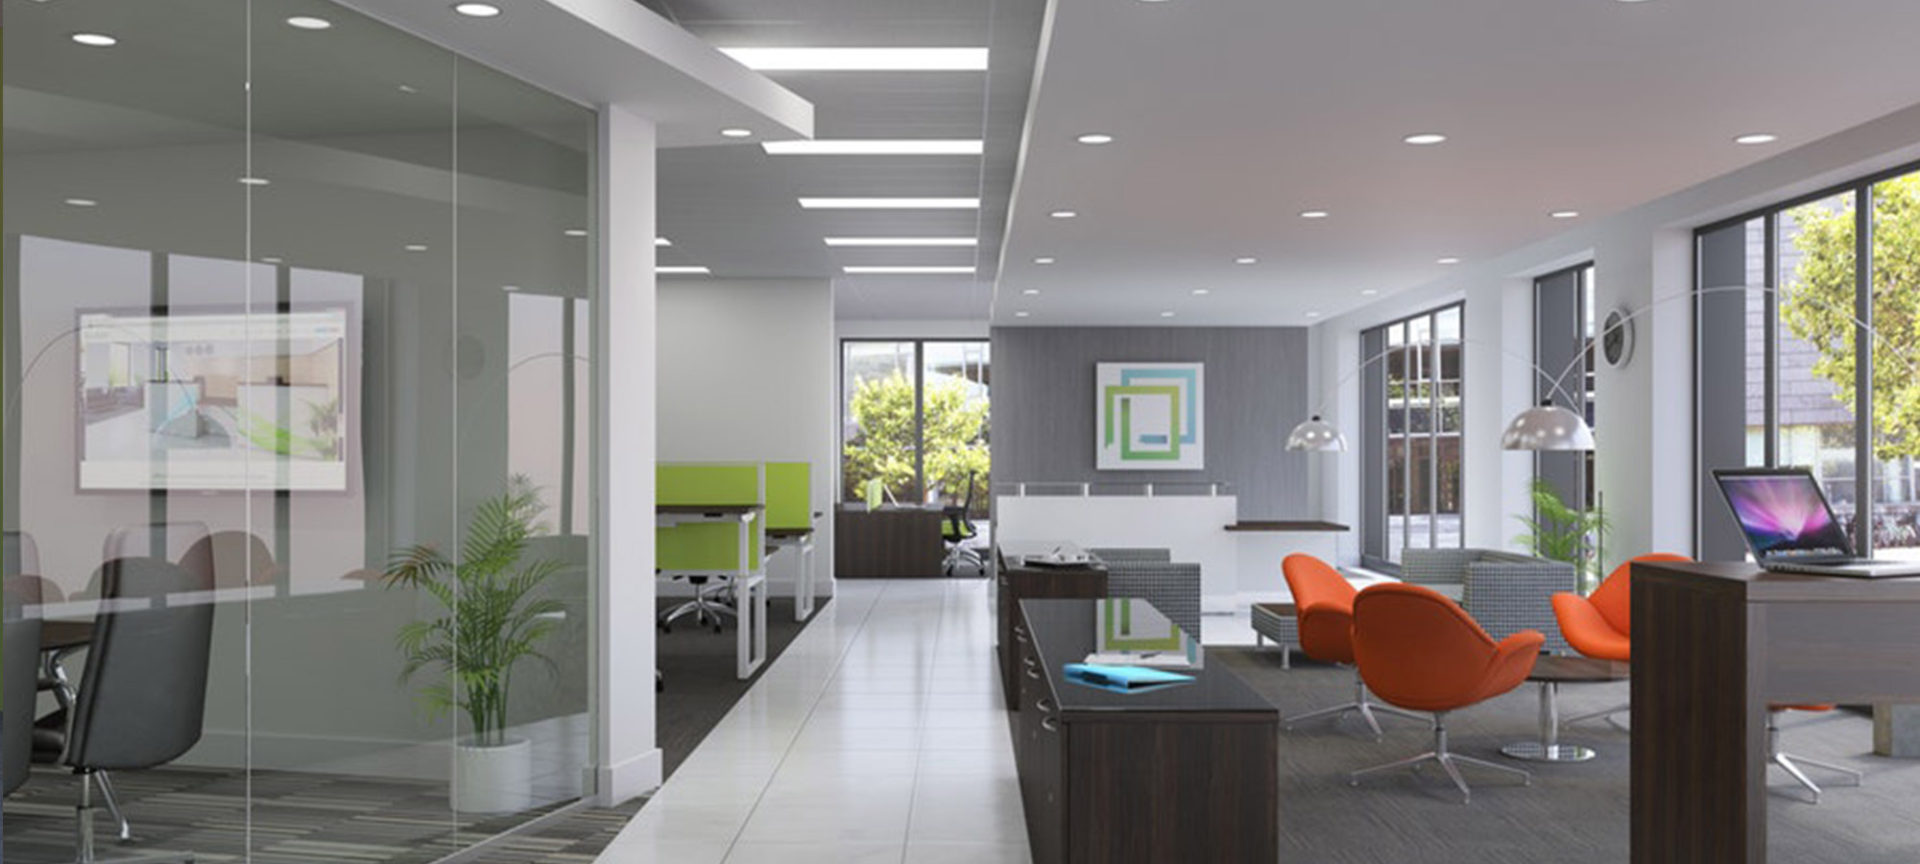 Office Fit-Outs | Office Furniture Specialists | Pure ...